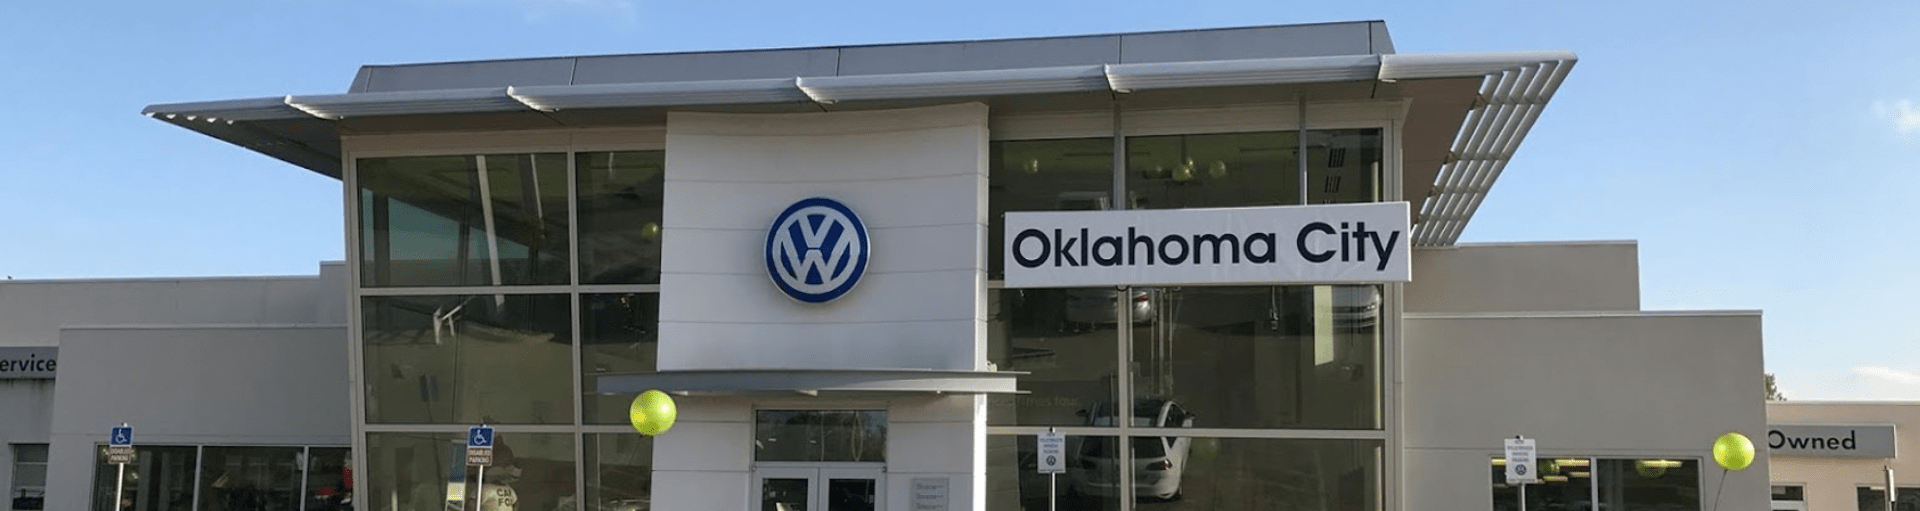 Oklahoma City Volkswagen Cabin Air Filter Replacement Service